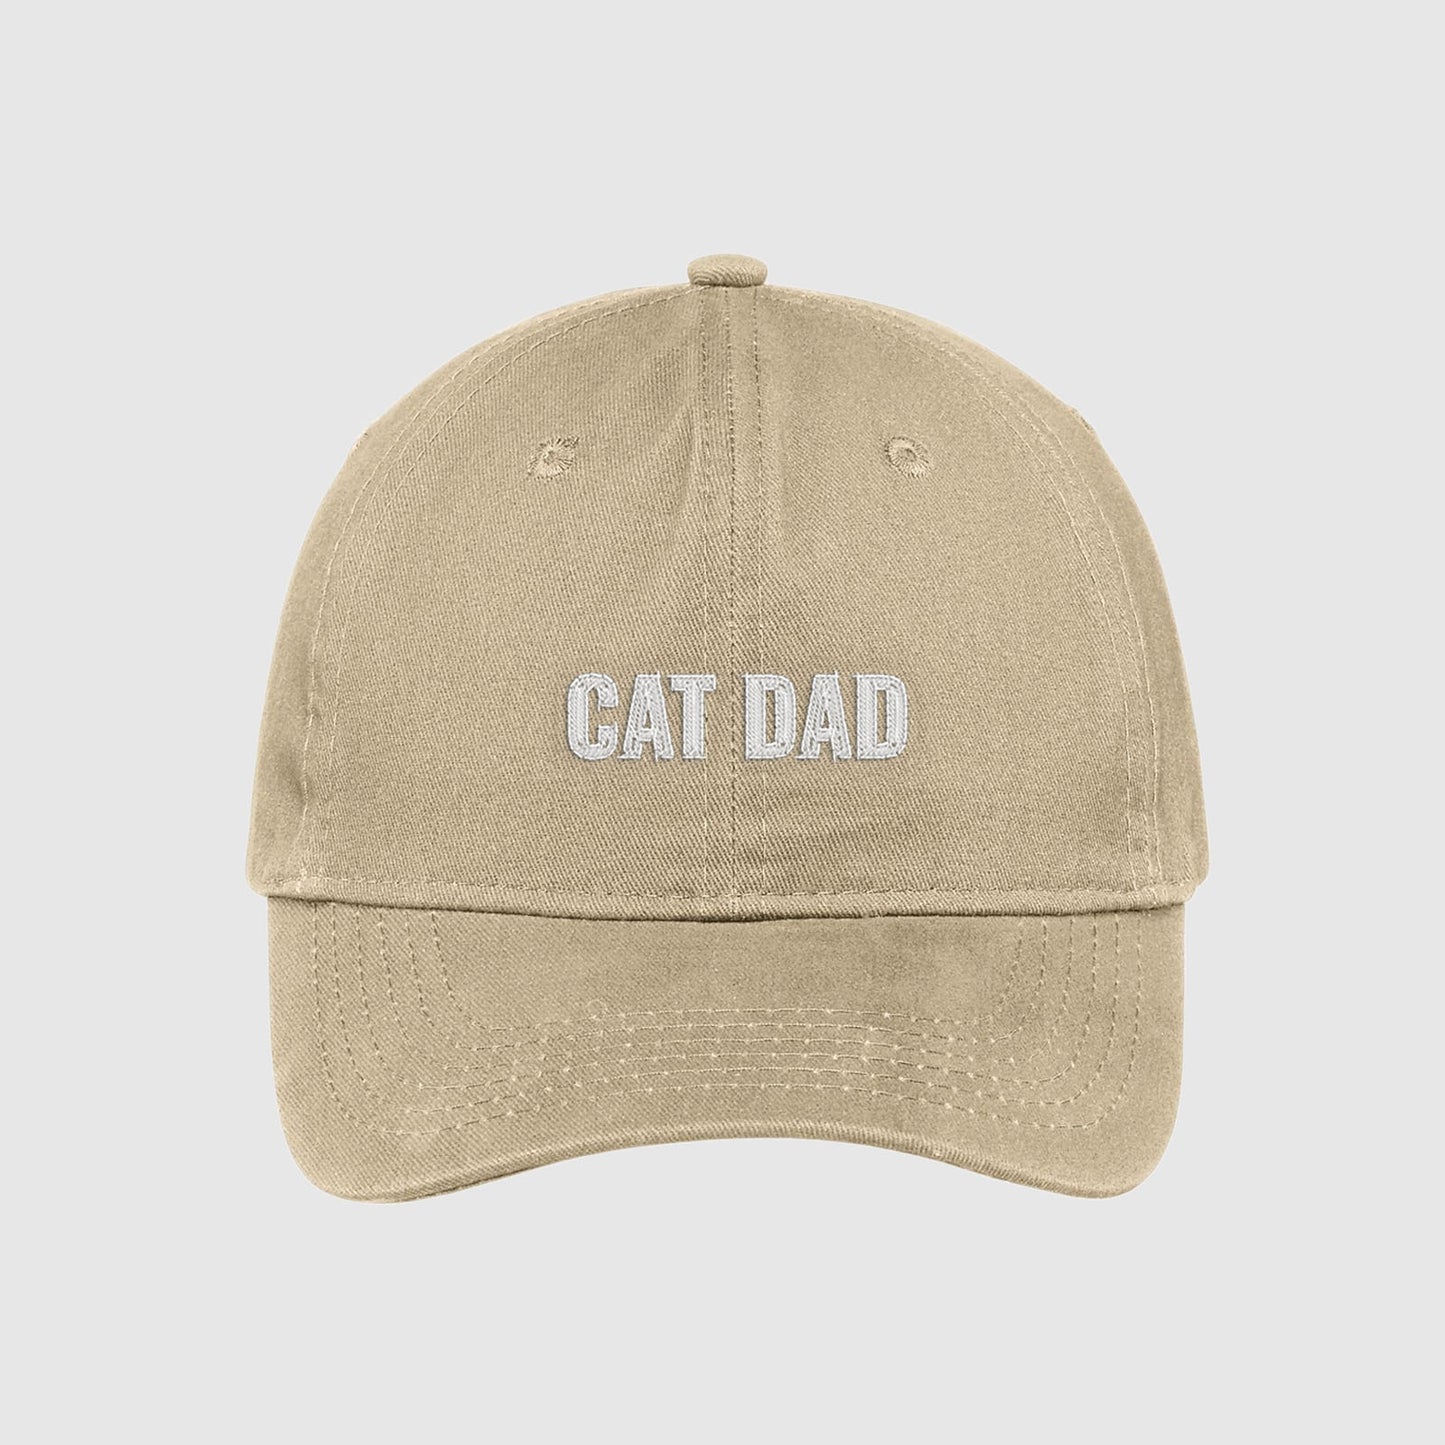 khaki cat dad hat embroidered with white text